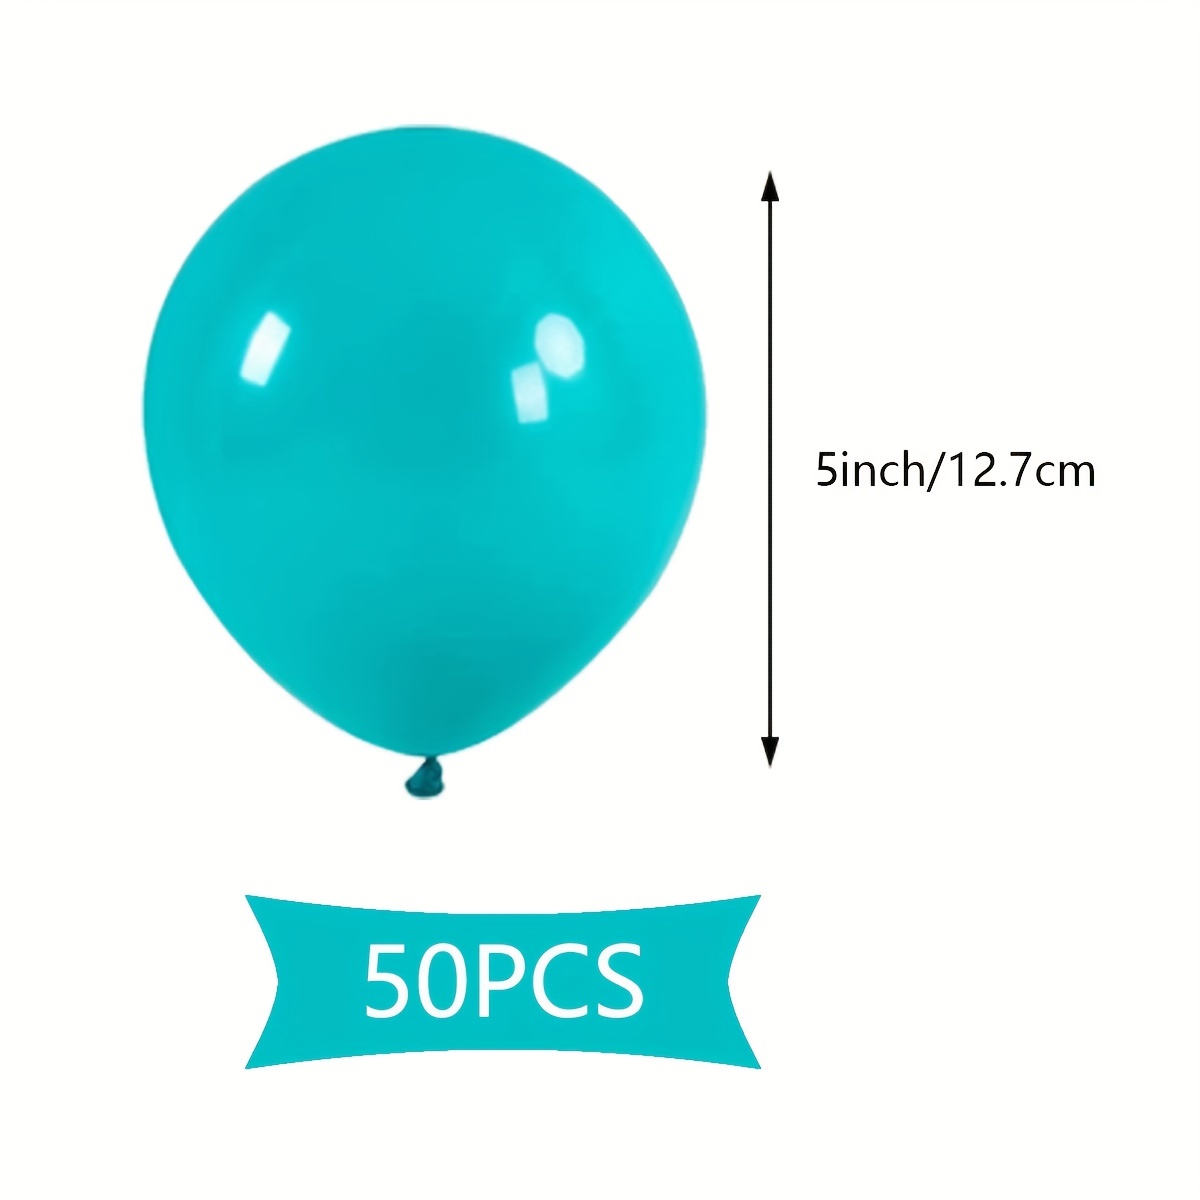 50pcs, Teal Blue Balloons, 5inch Tiffany Blue Party Latex Balloon,  Turquoise Blue Balloons, Acqua Blue Balloons For Sweet Girl 16th 18th 21th  Birthday